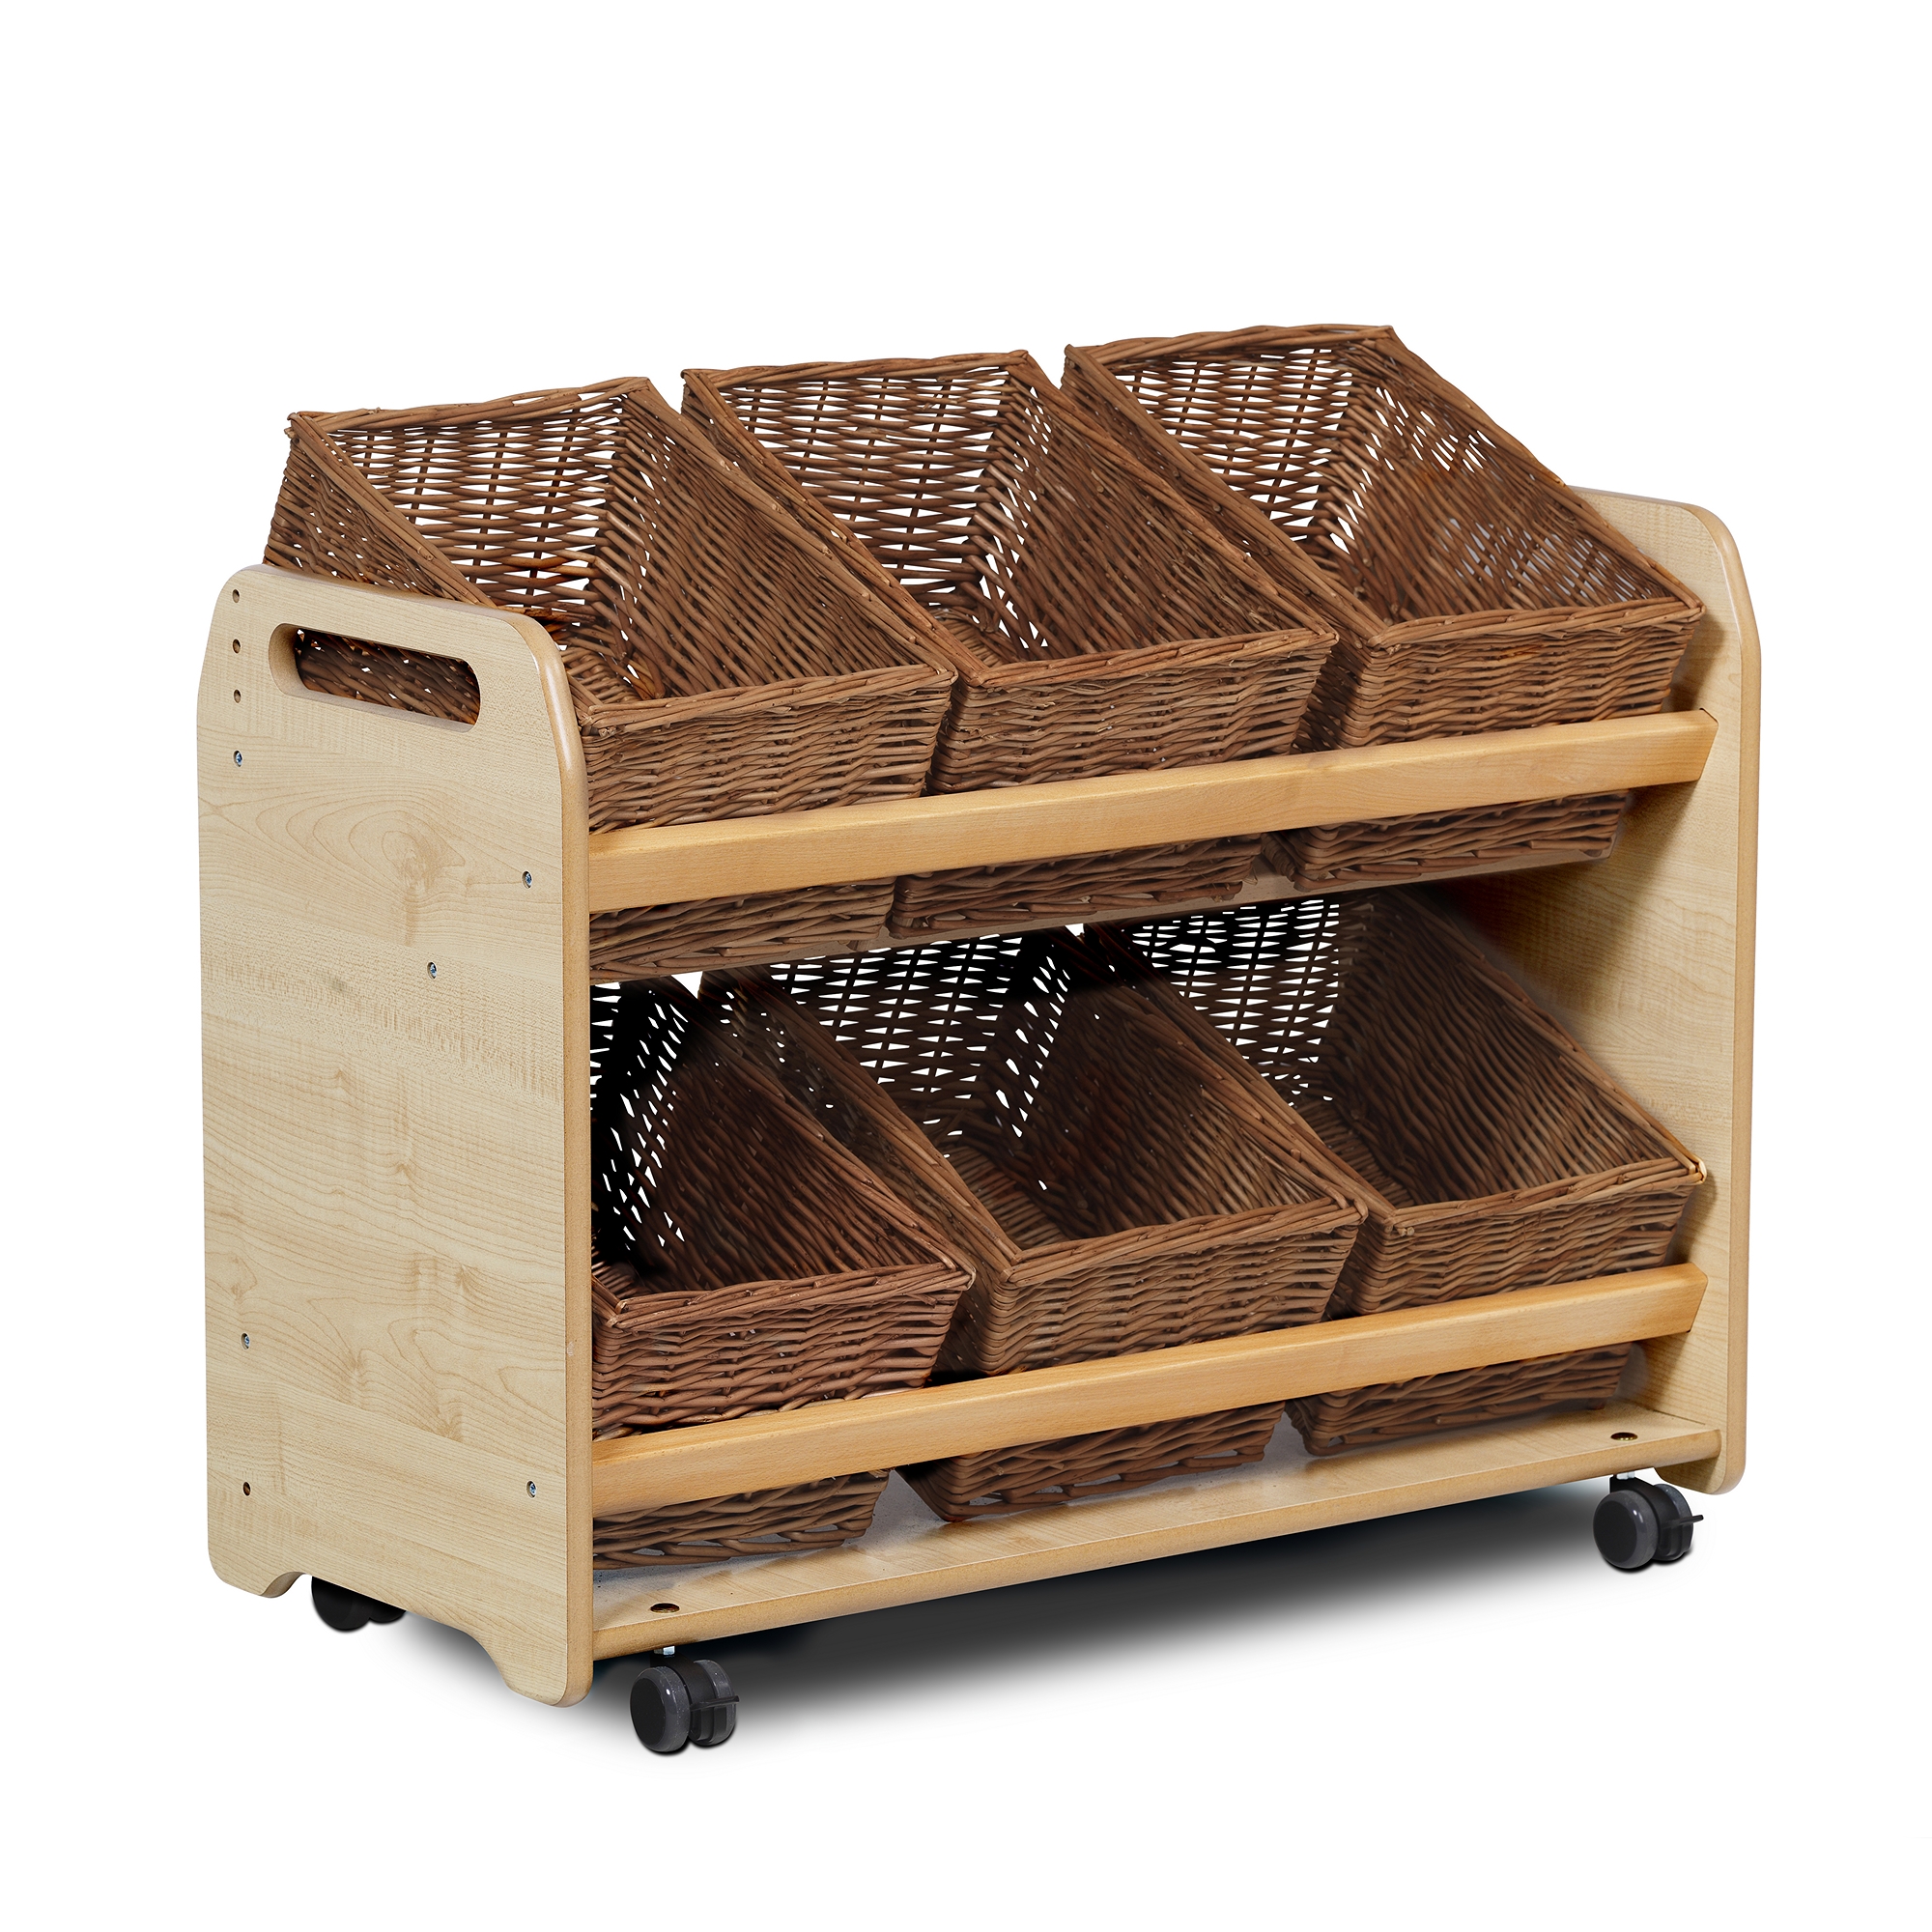 Playscapes Tilt Tote Storage Trolley Wicker Baskets